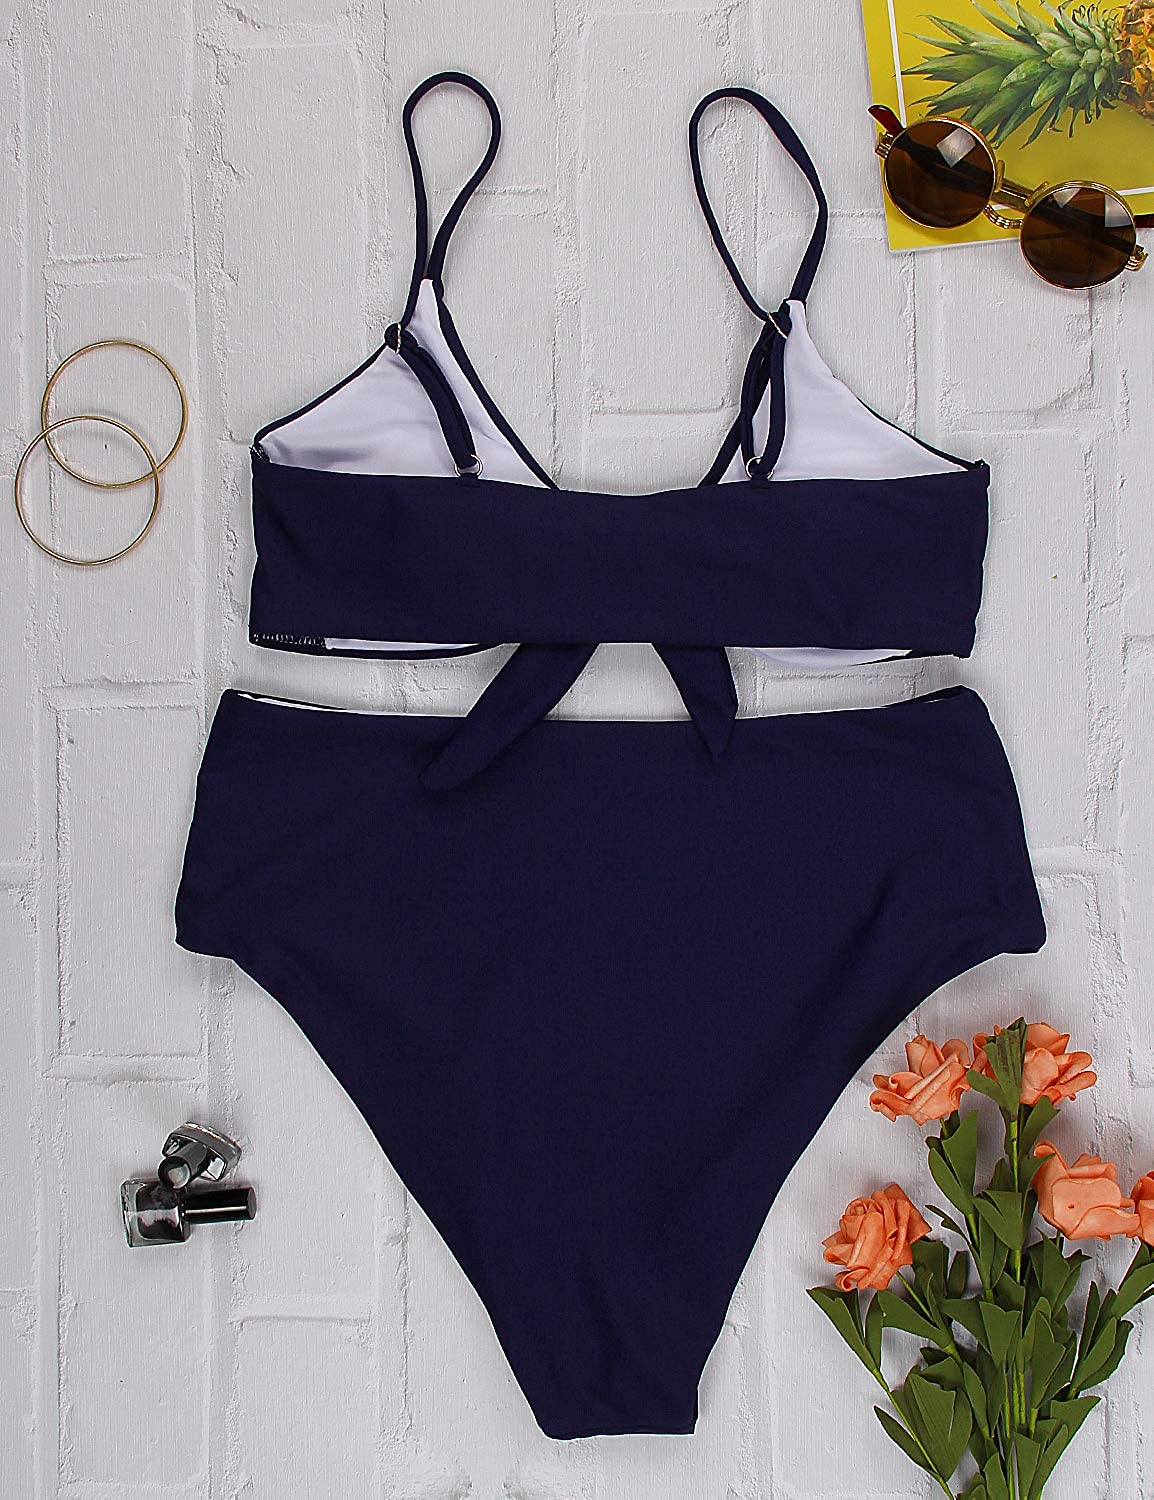 Blooming Jelly Womens High Waisted Bikini Set Tie Knot High, Navy, Size ...